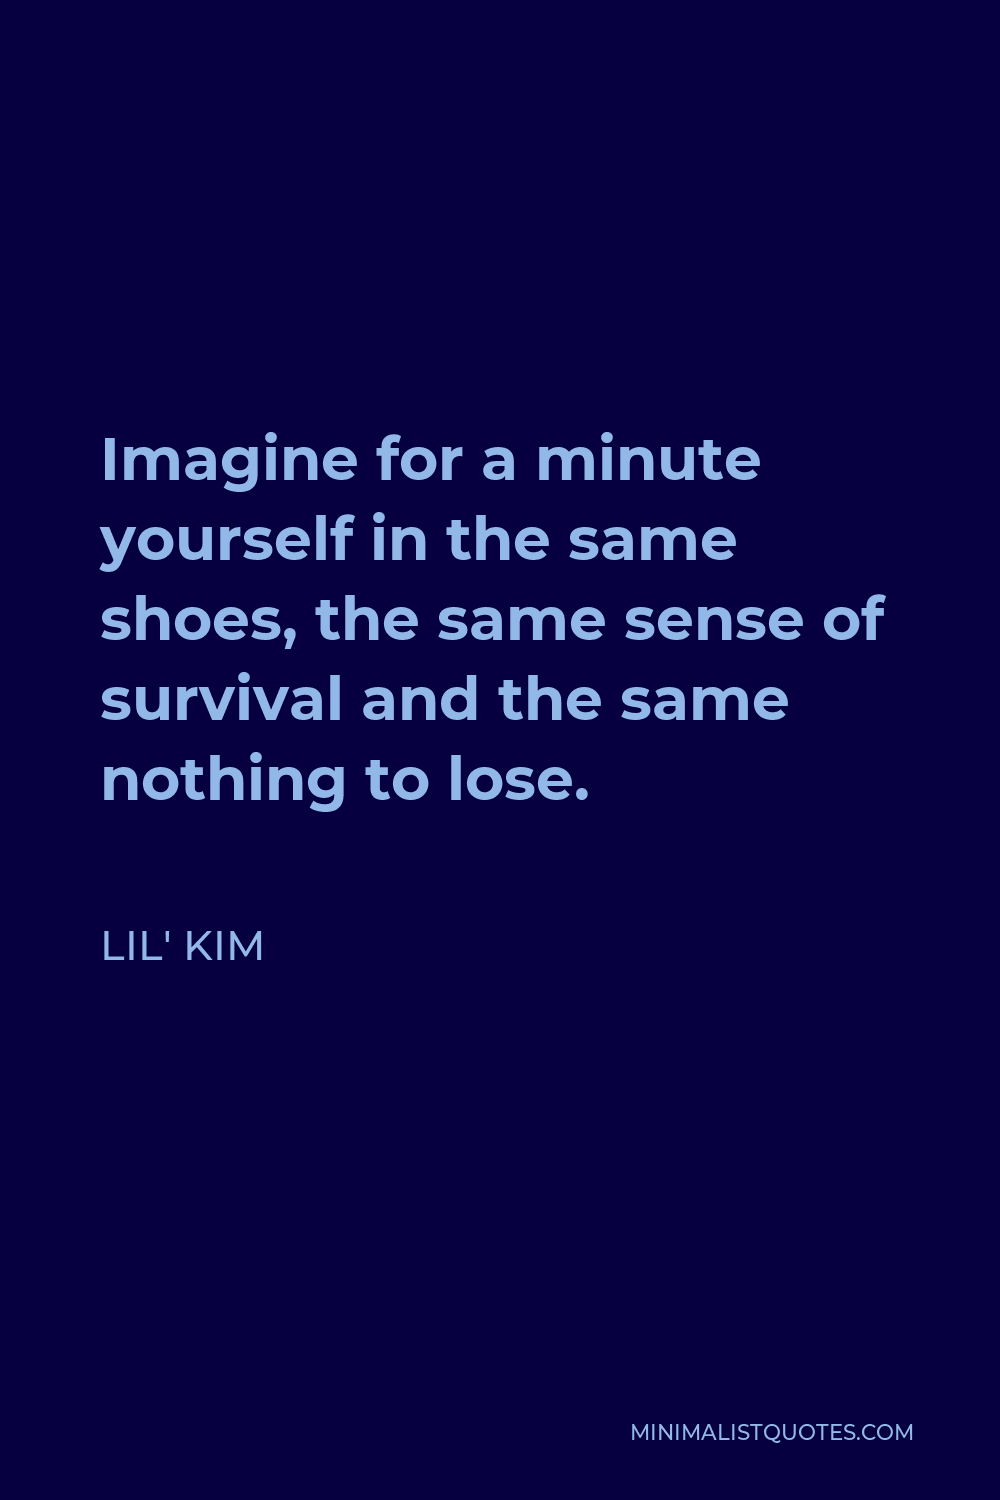 Lil' Kim Quote - Imagine for a minute yourself in the same shoes, the same sense of survival and the same nothing to lose.